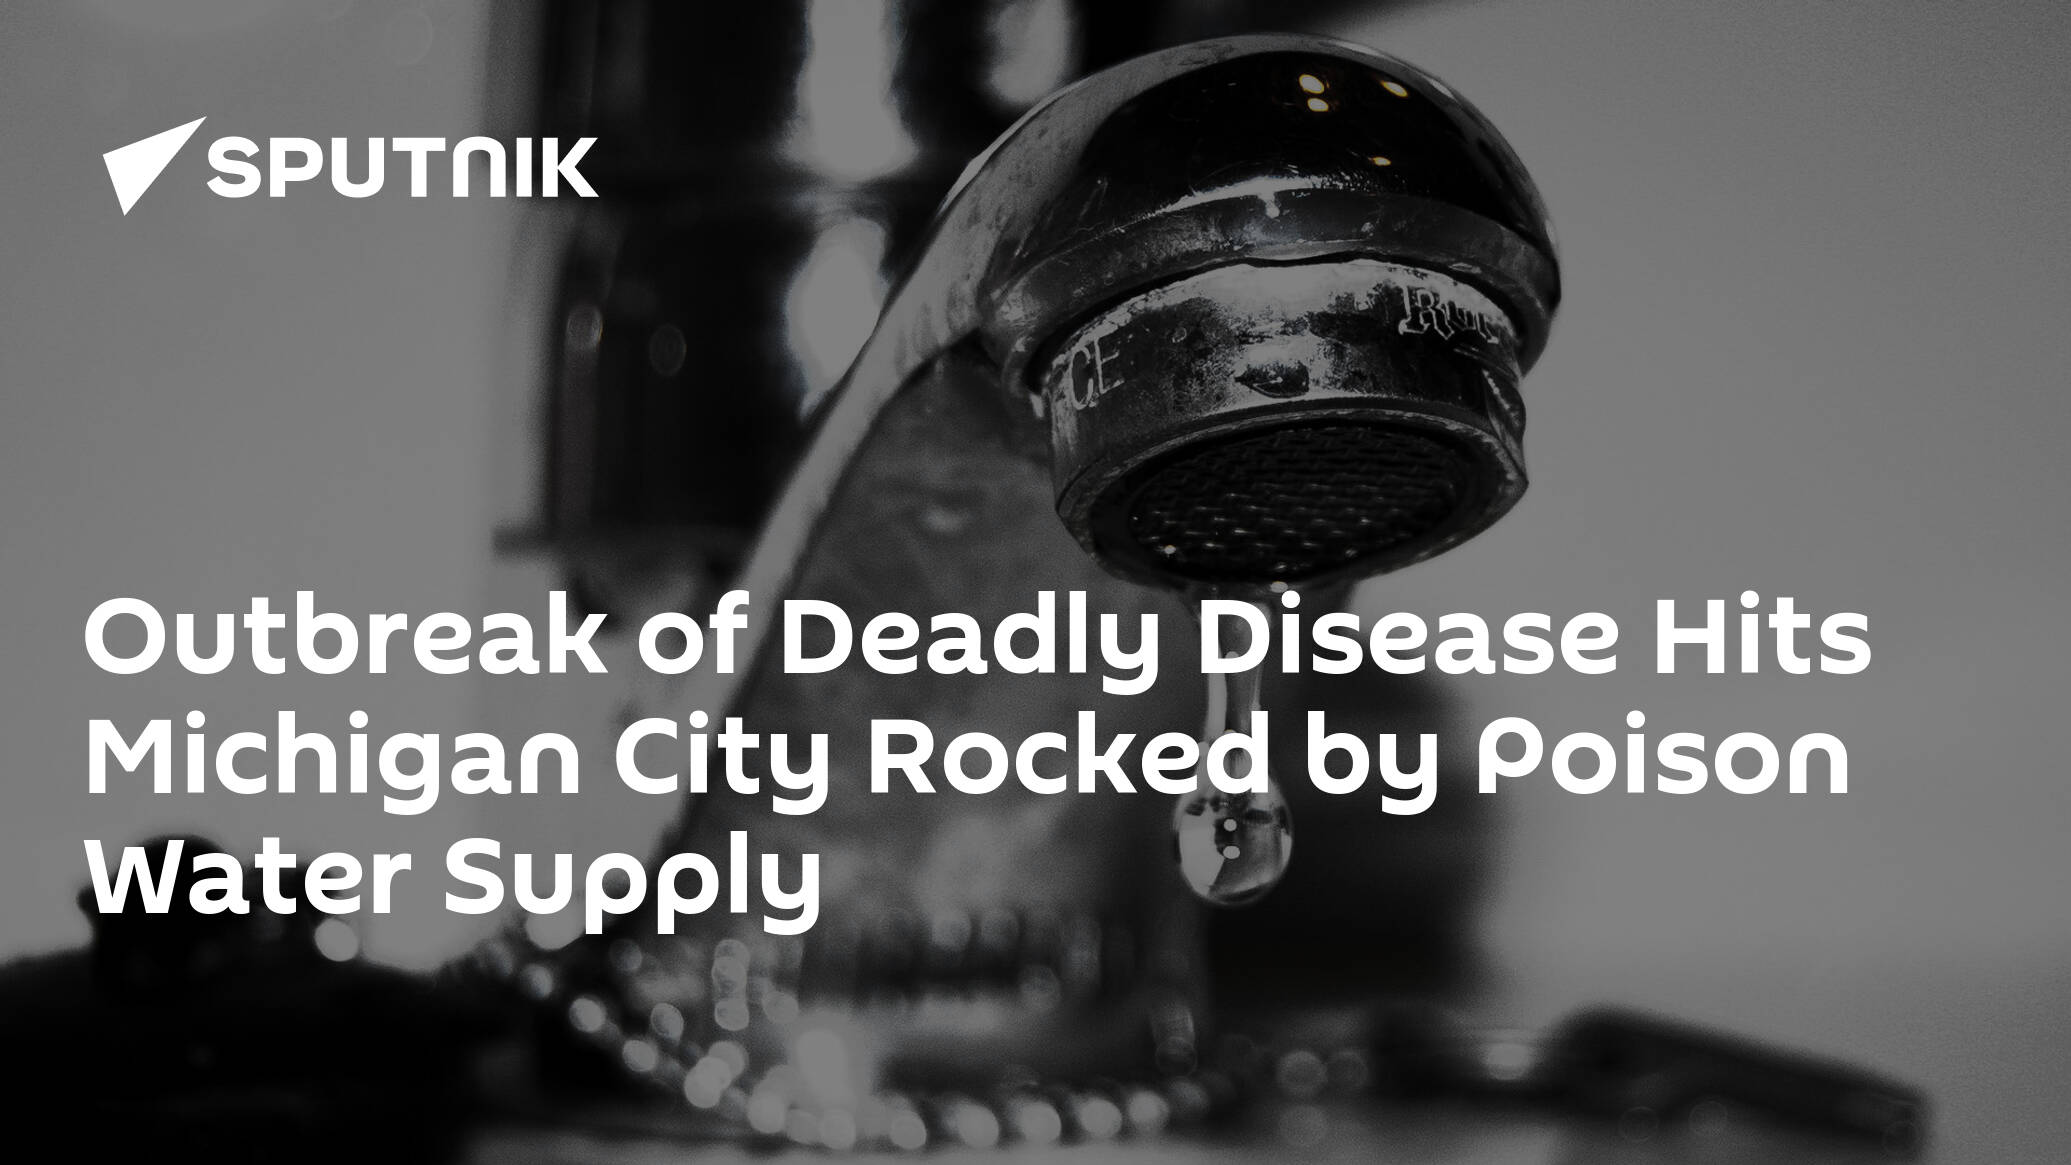 Outbreak Of Deadly Disease Hits Michigan City Rocked By Poison Water Supply 14012016 6634